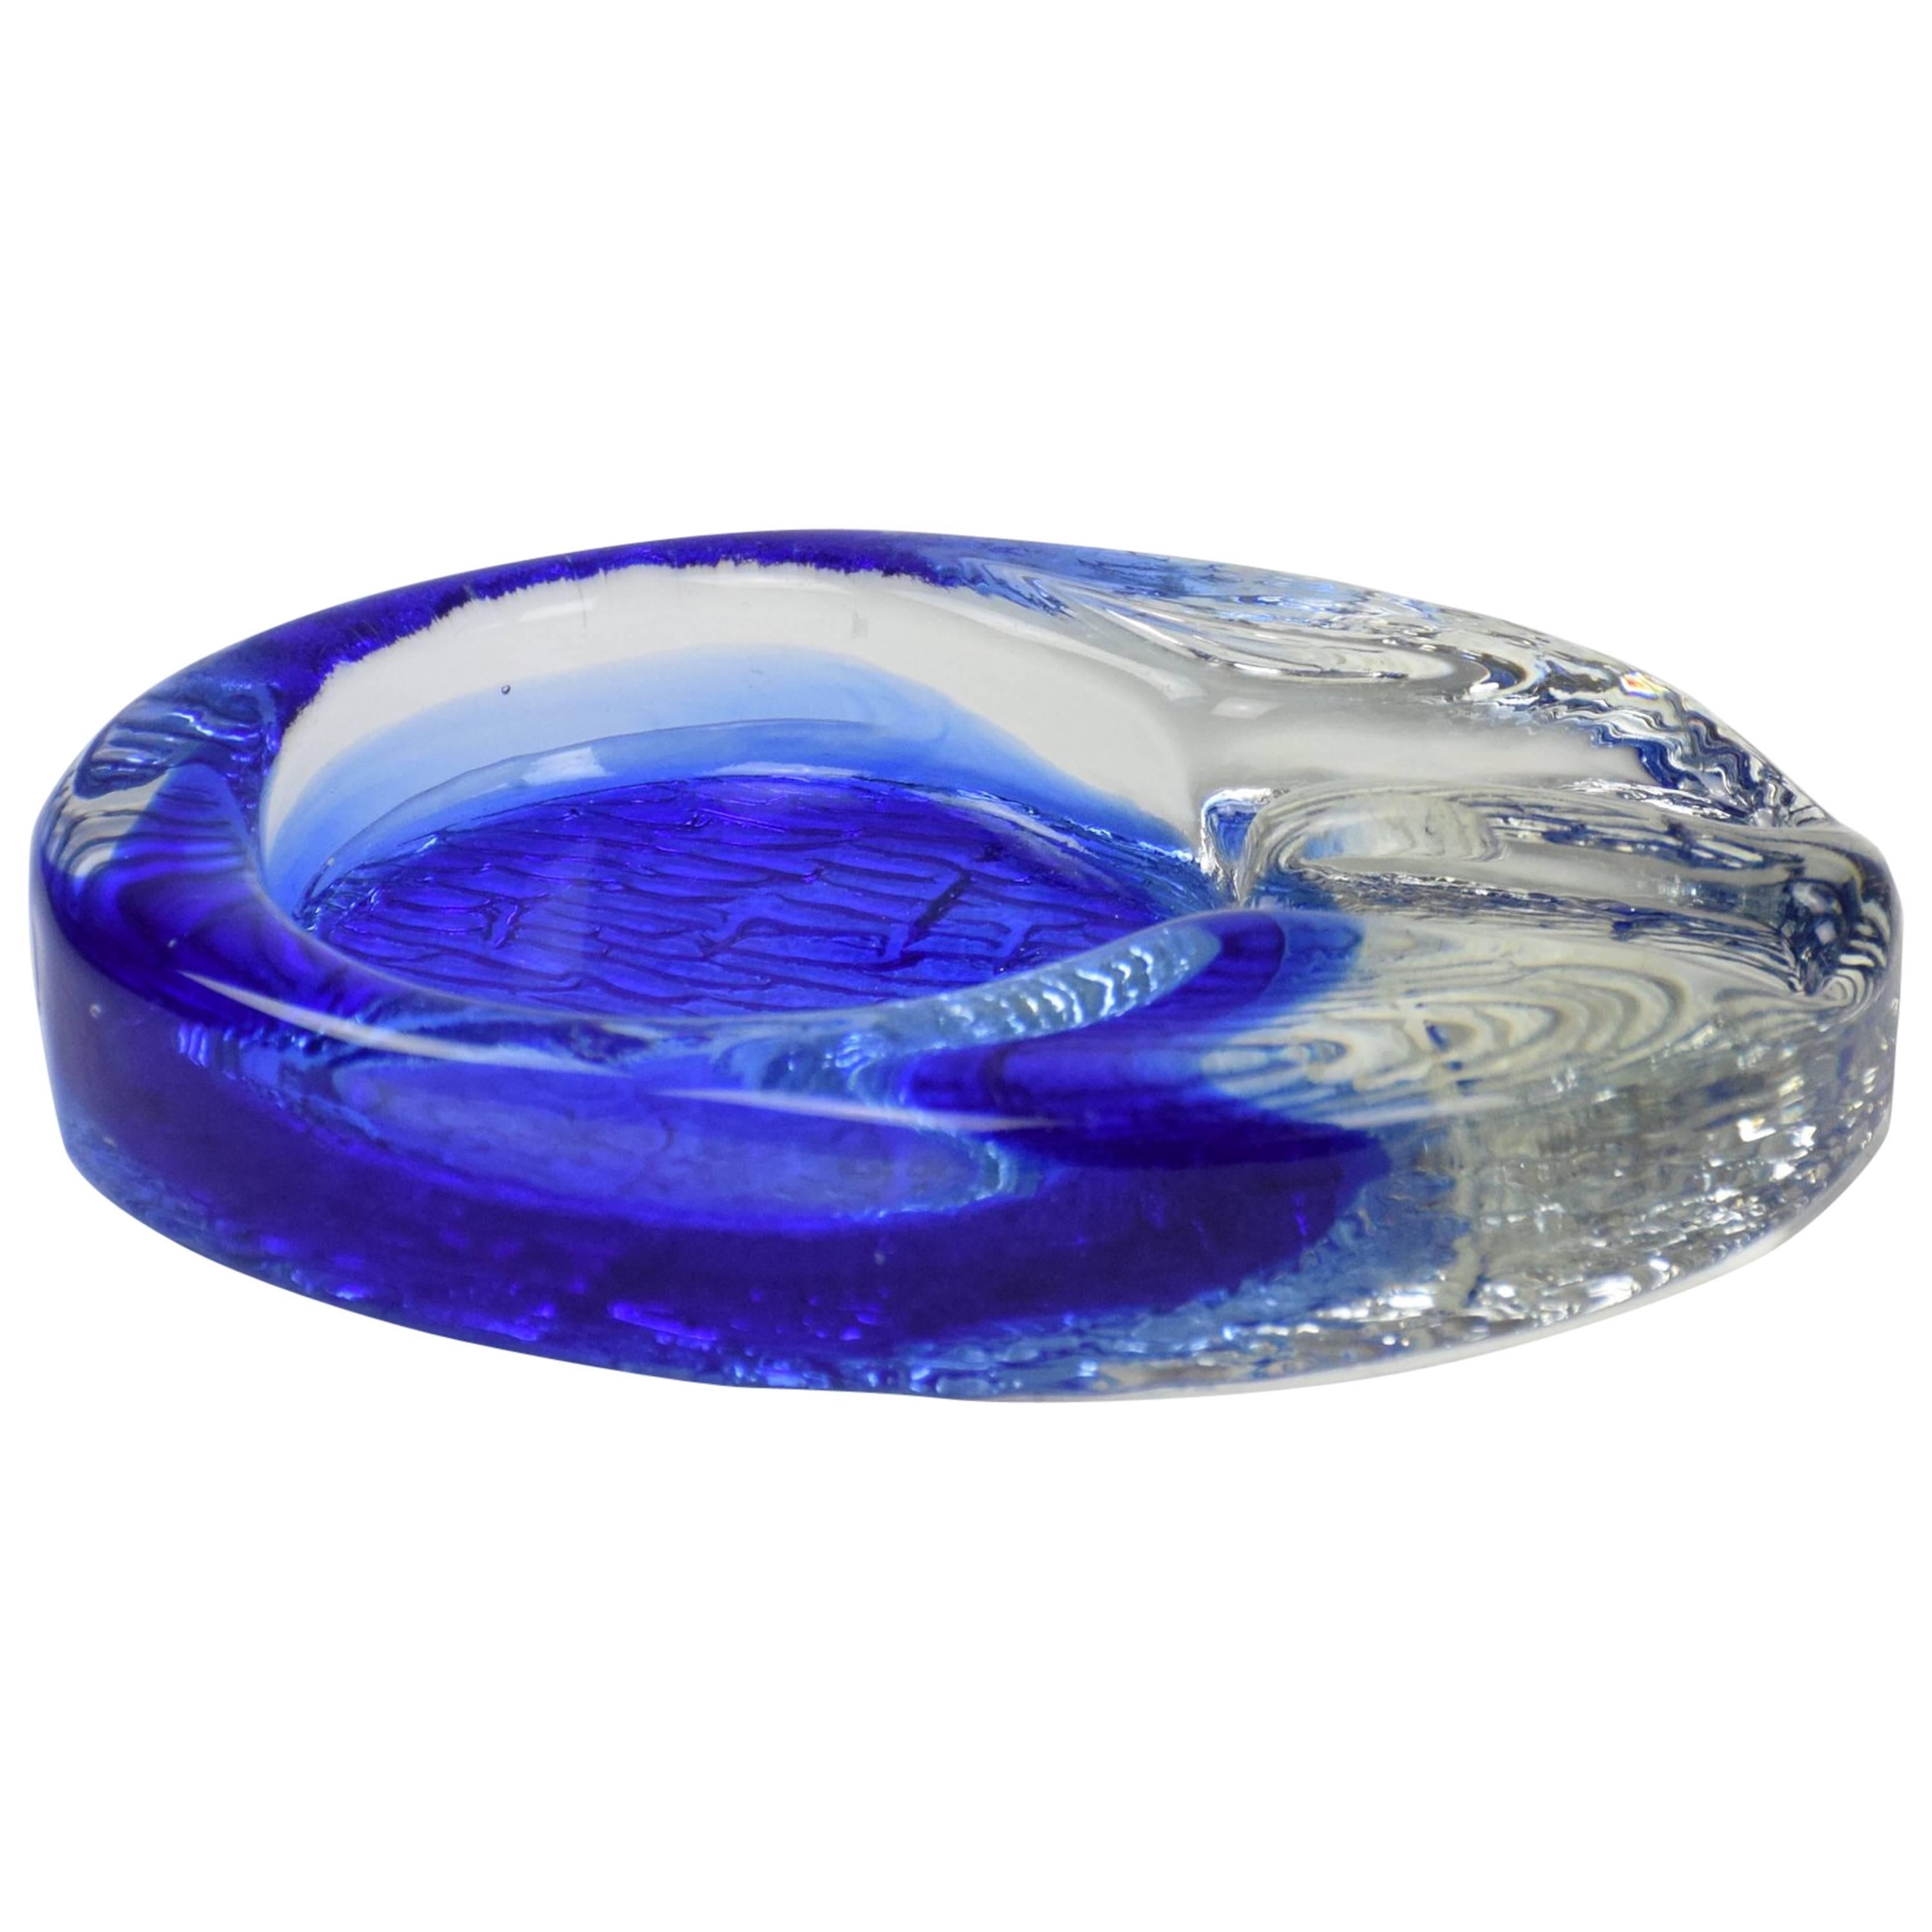 20th century Italian Murano glass vintage ashtray, in hues of blue and white glass with textures effect at the bottom.
A vibrant decorative object which will brighten any form of table.
Italy, circa 1950-1960s.